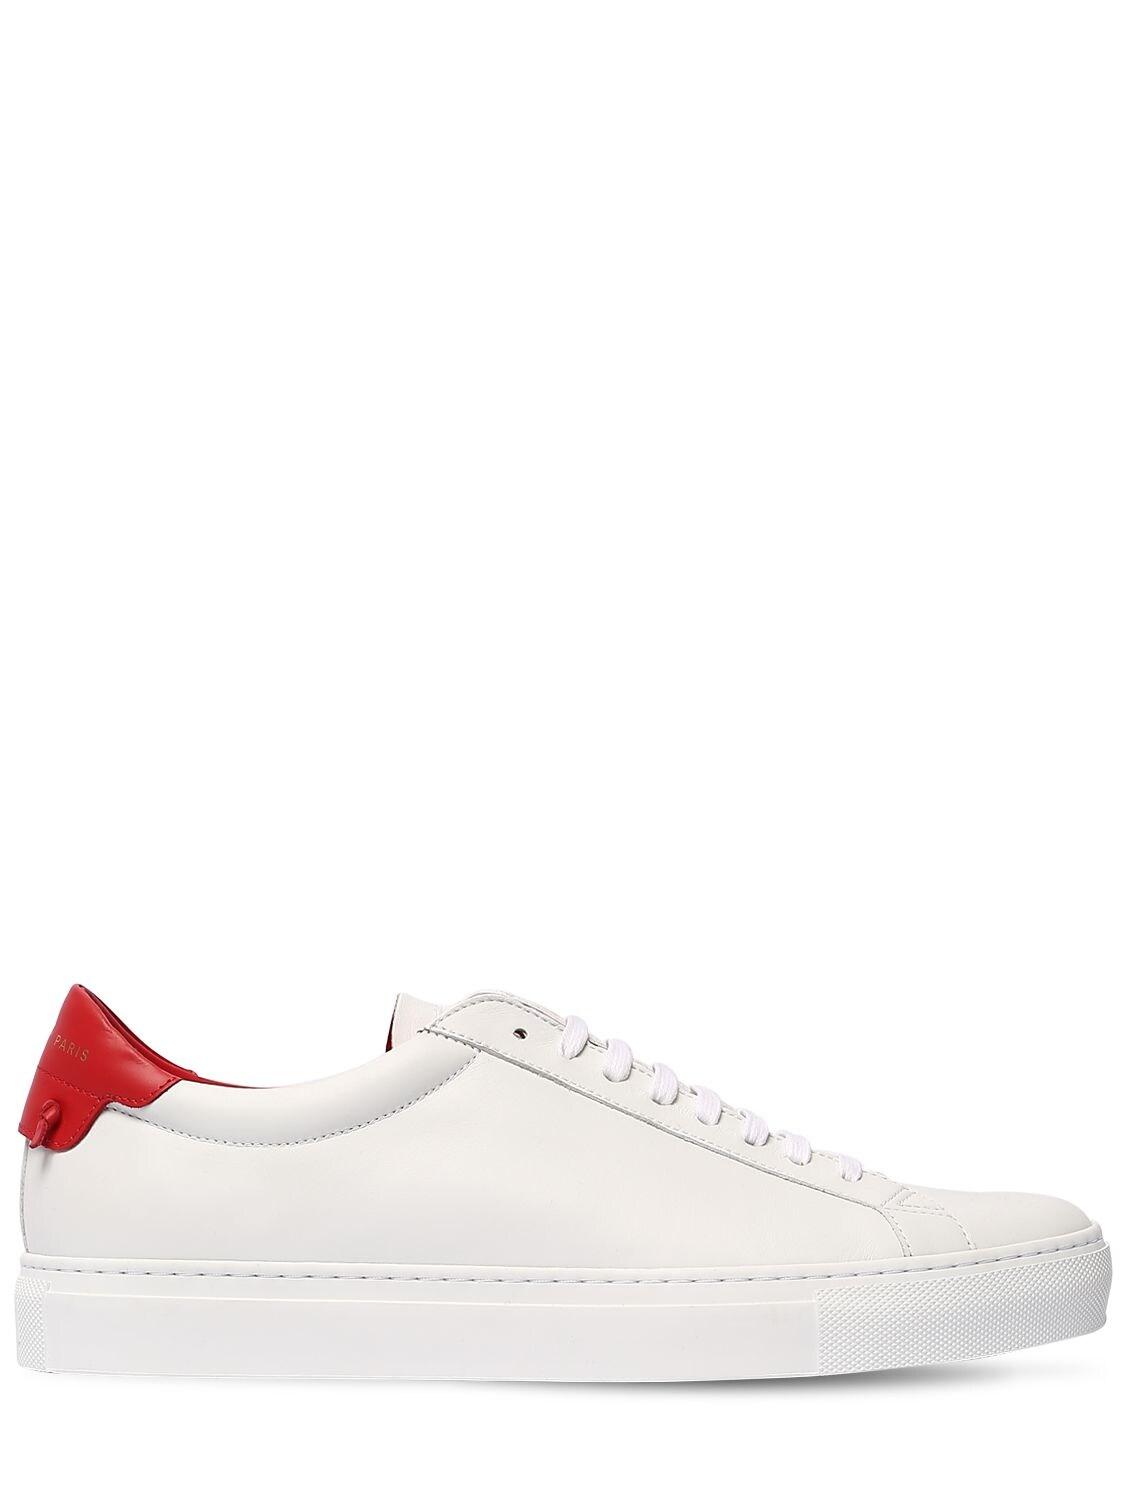 Givenchy Urban Street Leather Tennis Sneakers in White/Red (White) for ...